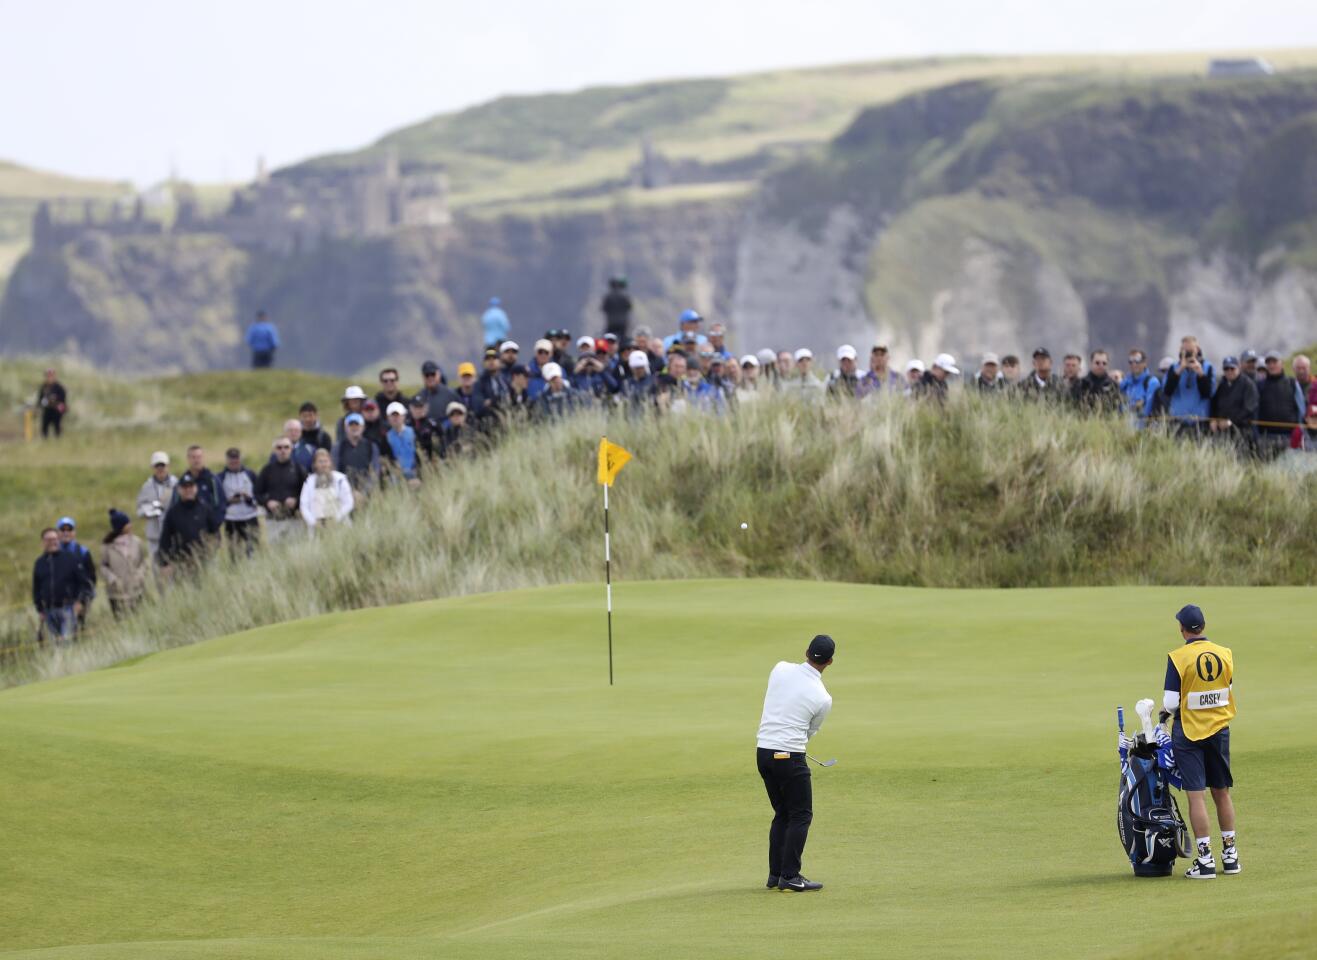 England's Paul Casey chips onto the eighth green during the first round of the 148th Open Championship at Royal Portrush Golf Club in Northern Ireland.